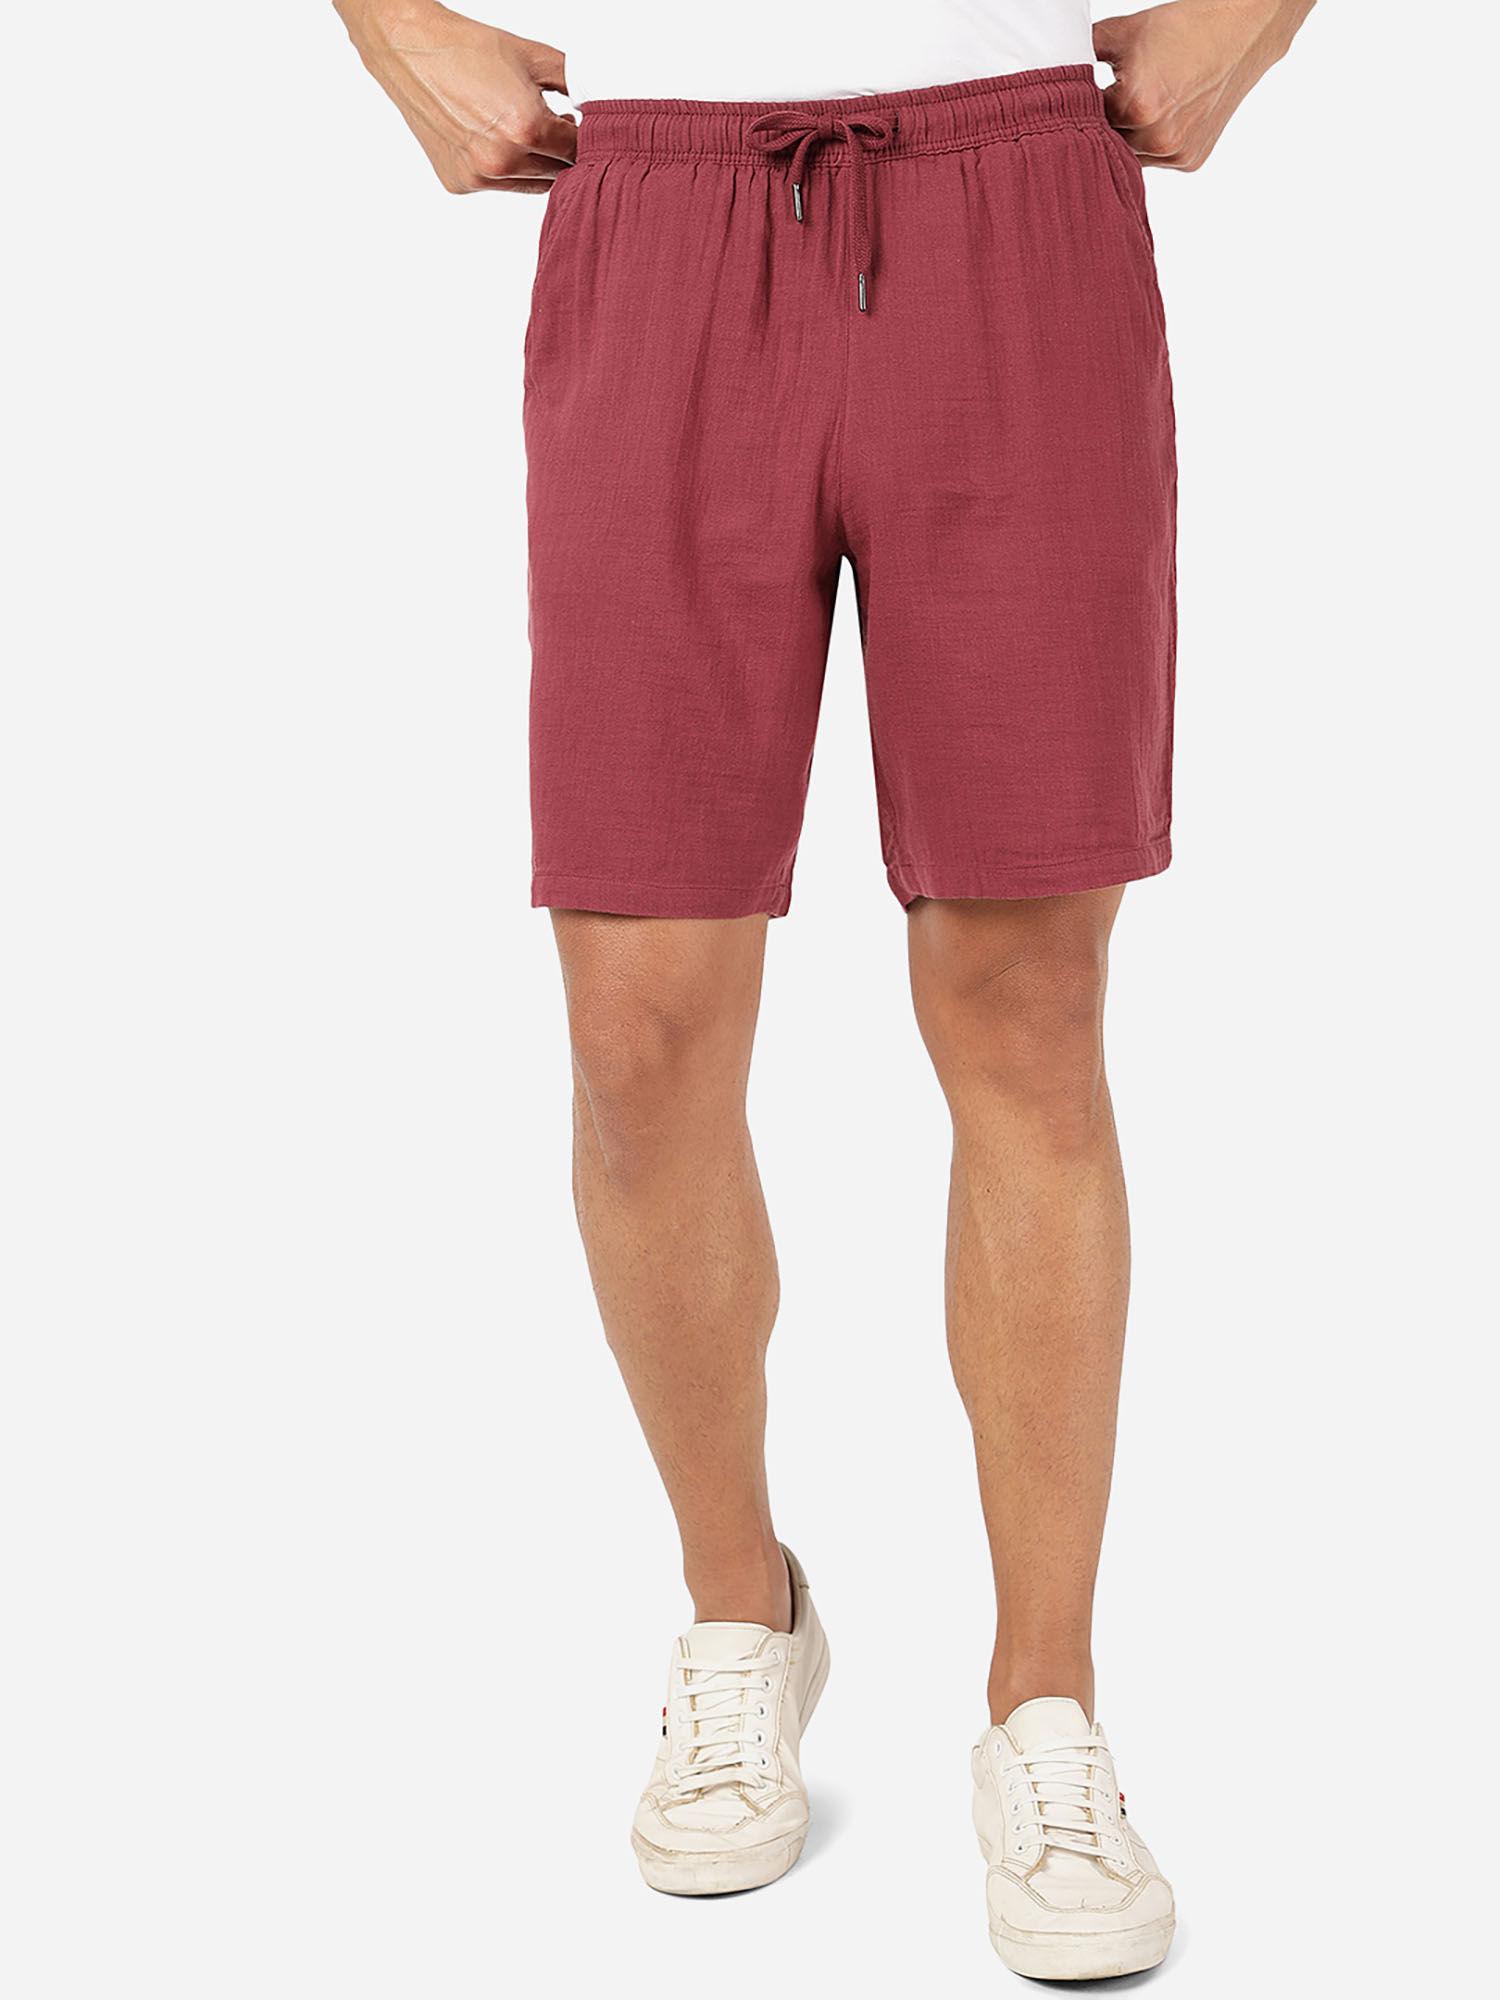 mens-100%-cotton-solid-slim-fit-shorts-pink